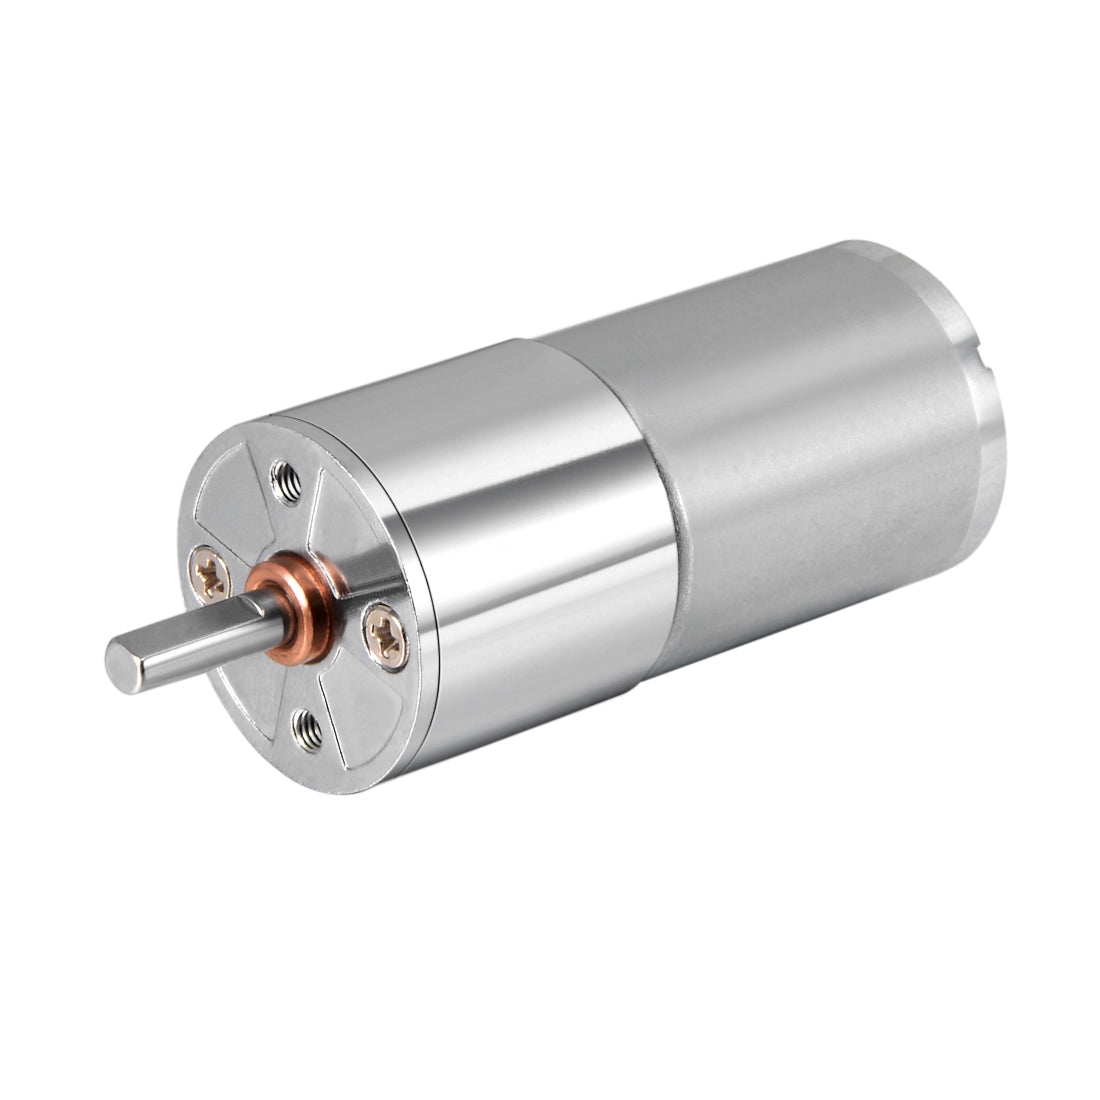 uxcell Uxcell 12V DC 30 RPM Gear Motor Electric Reduction Gearbox Centric Output Shaft